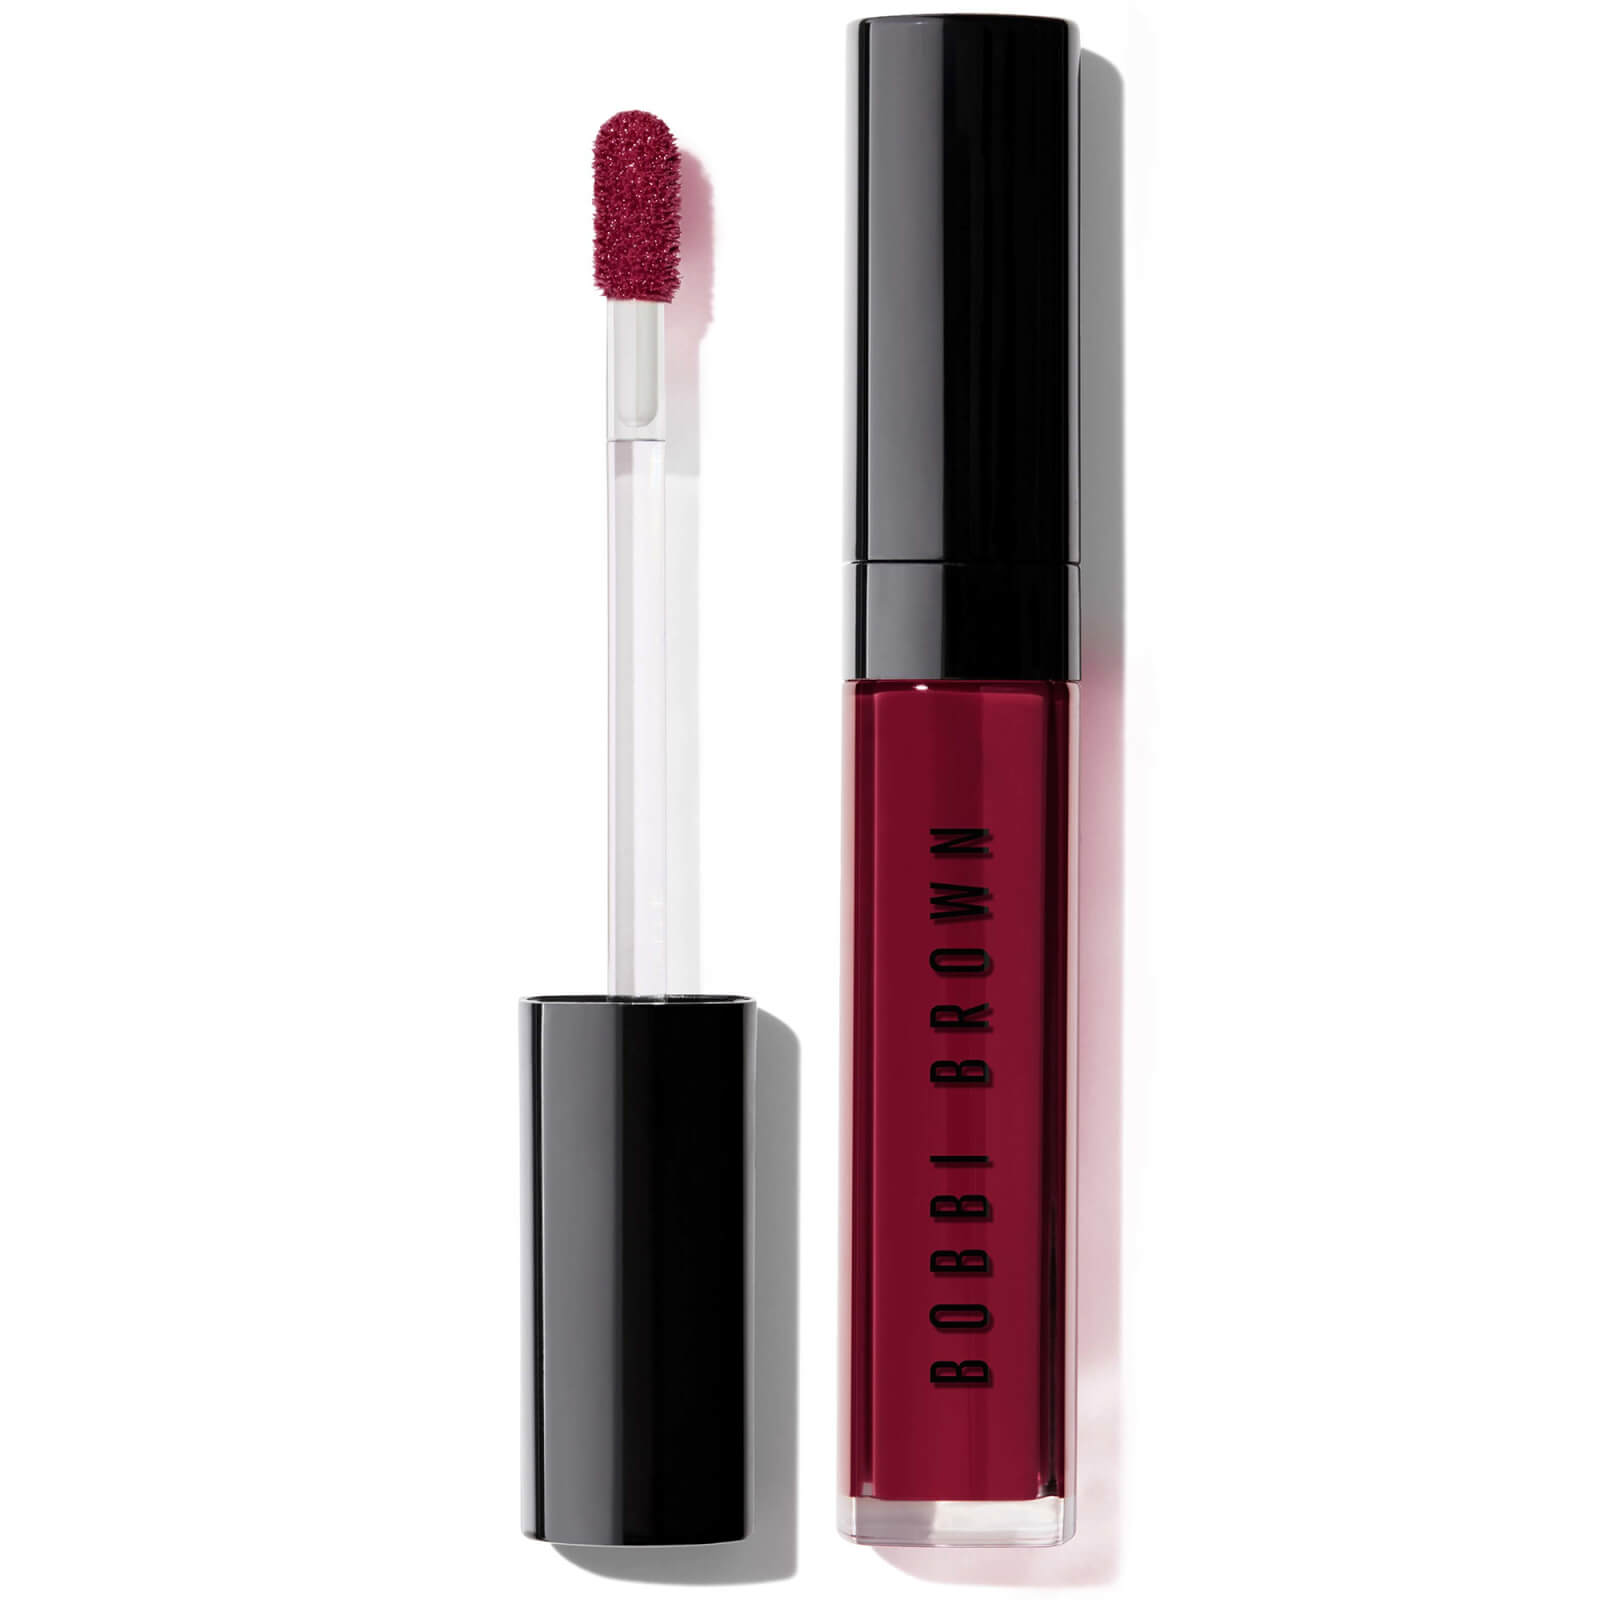 Bobbi Brown Crushed Oil-Infused Gloss (Various Shades) - After Party